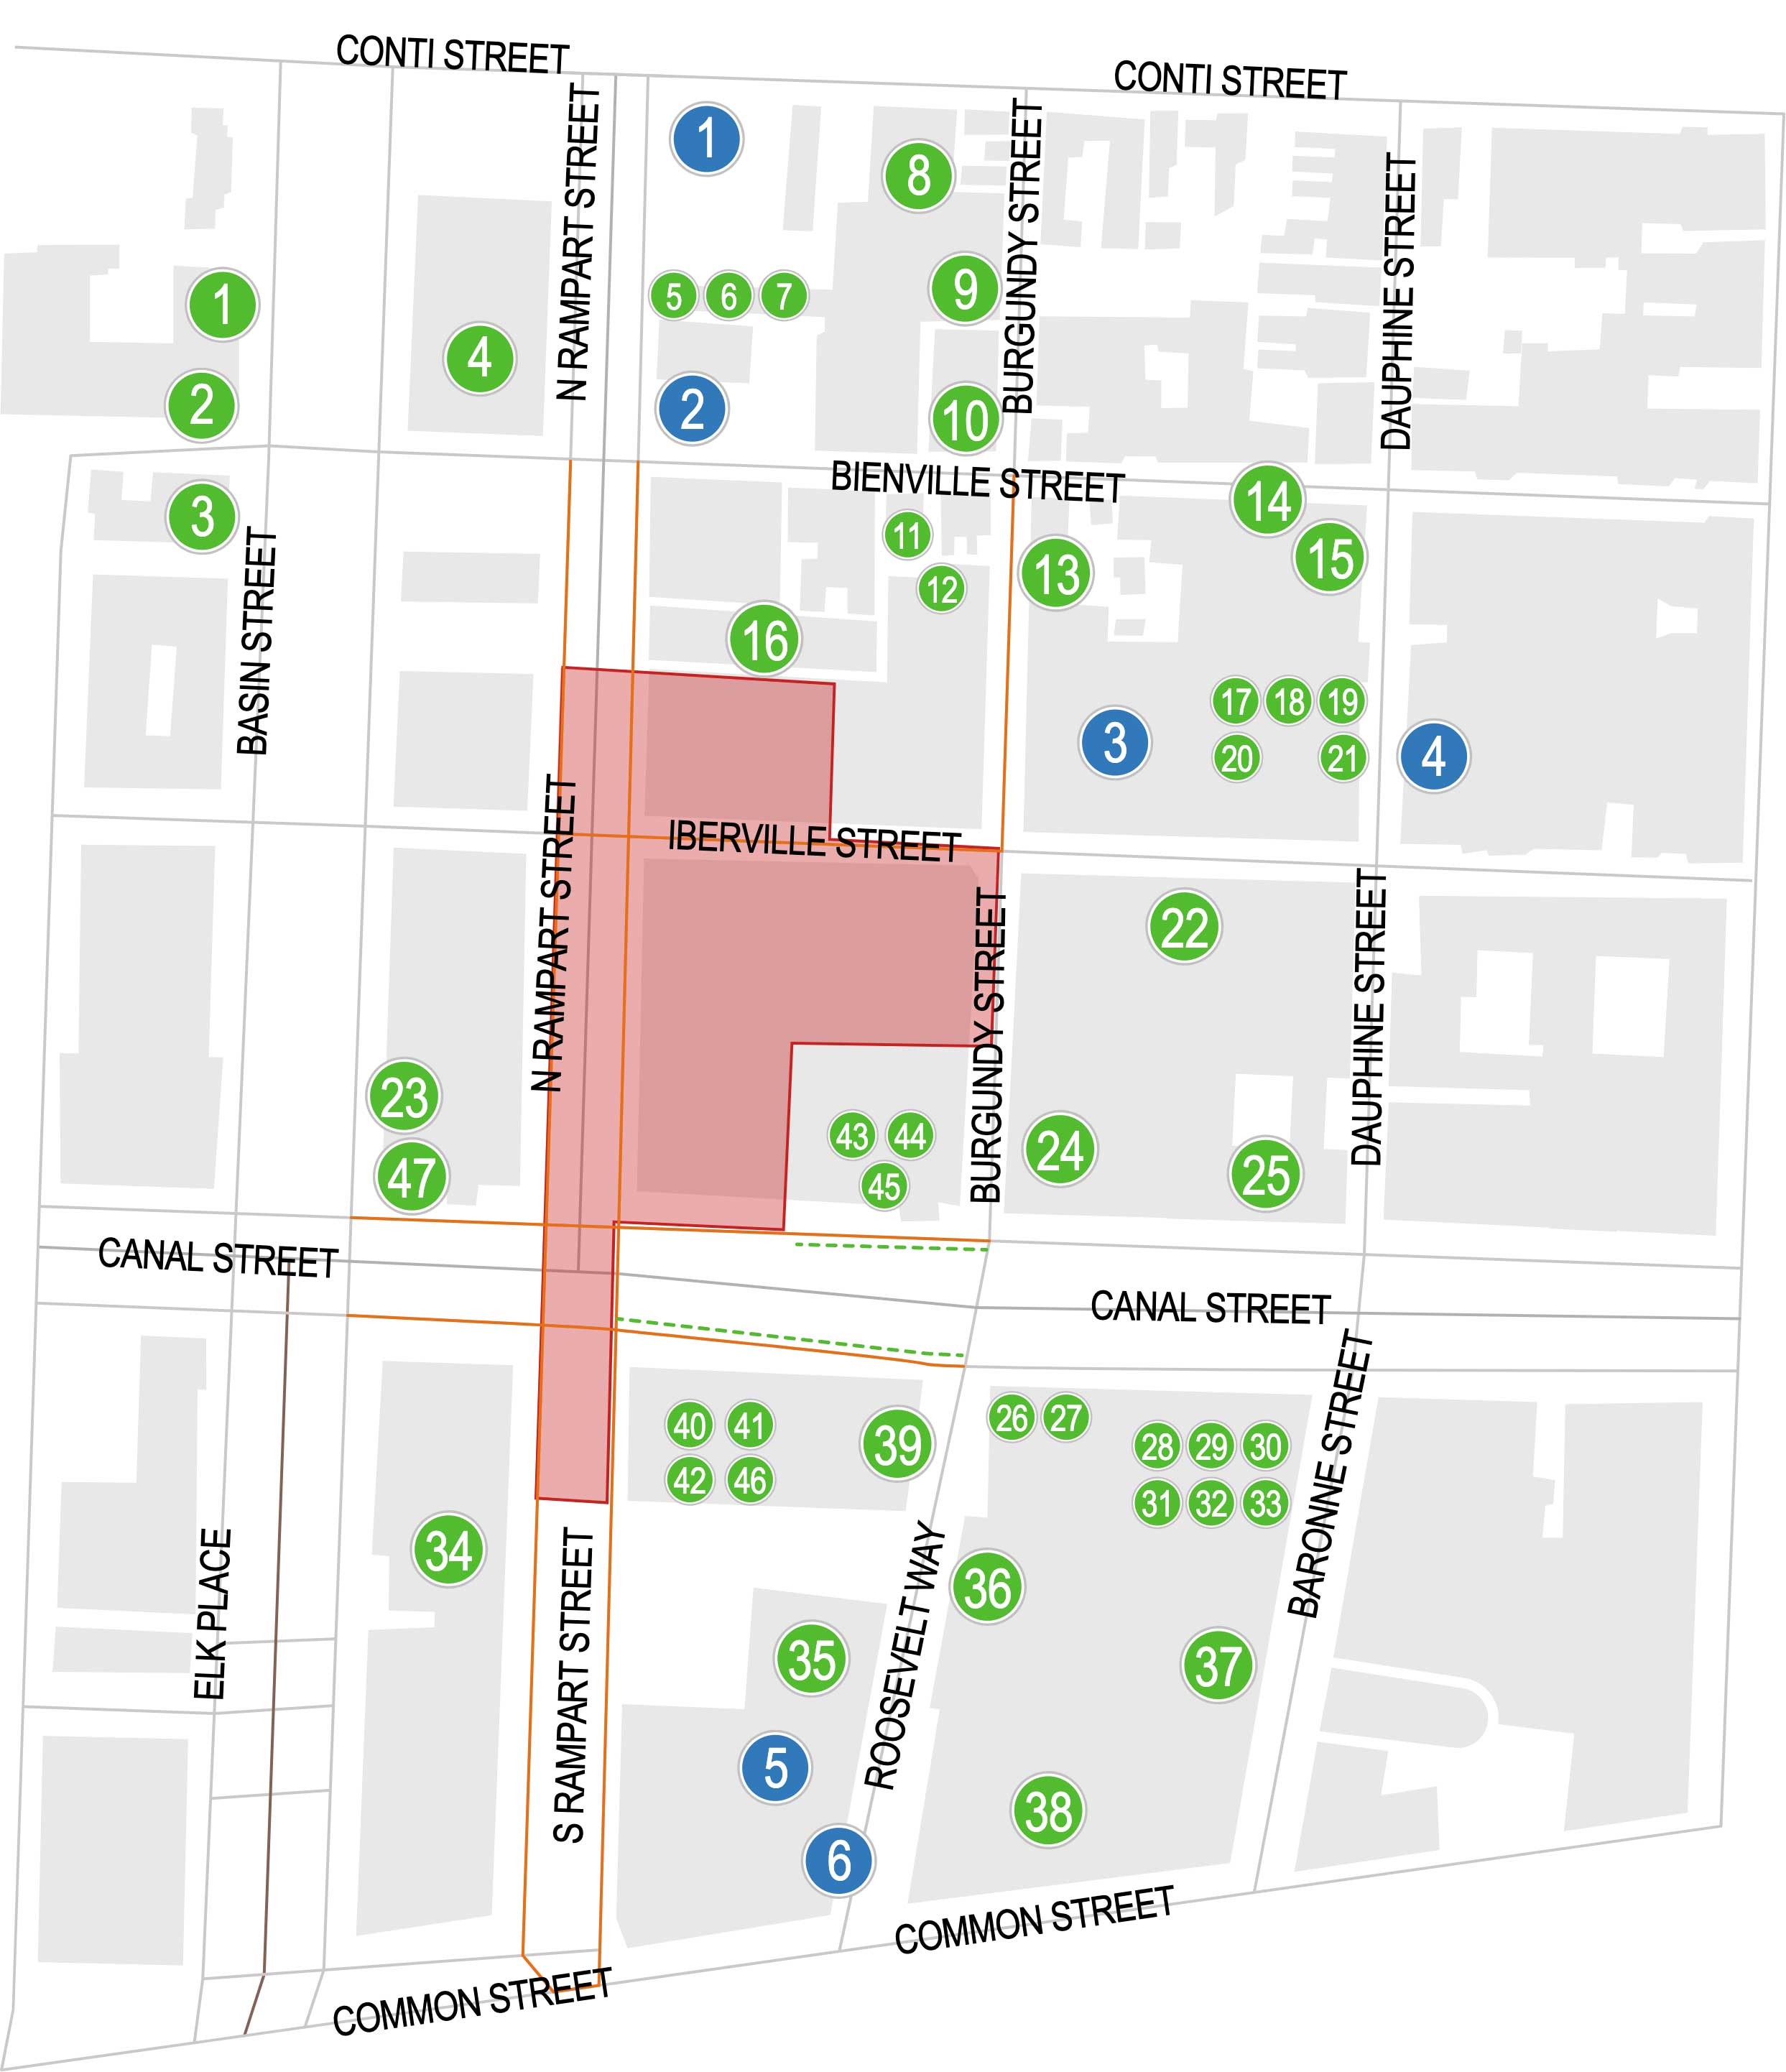 Map with open businesses around the Hard Rock Hotel site